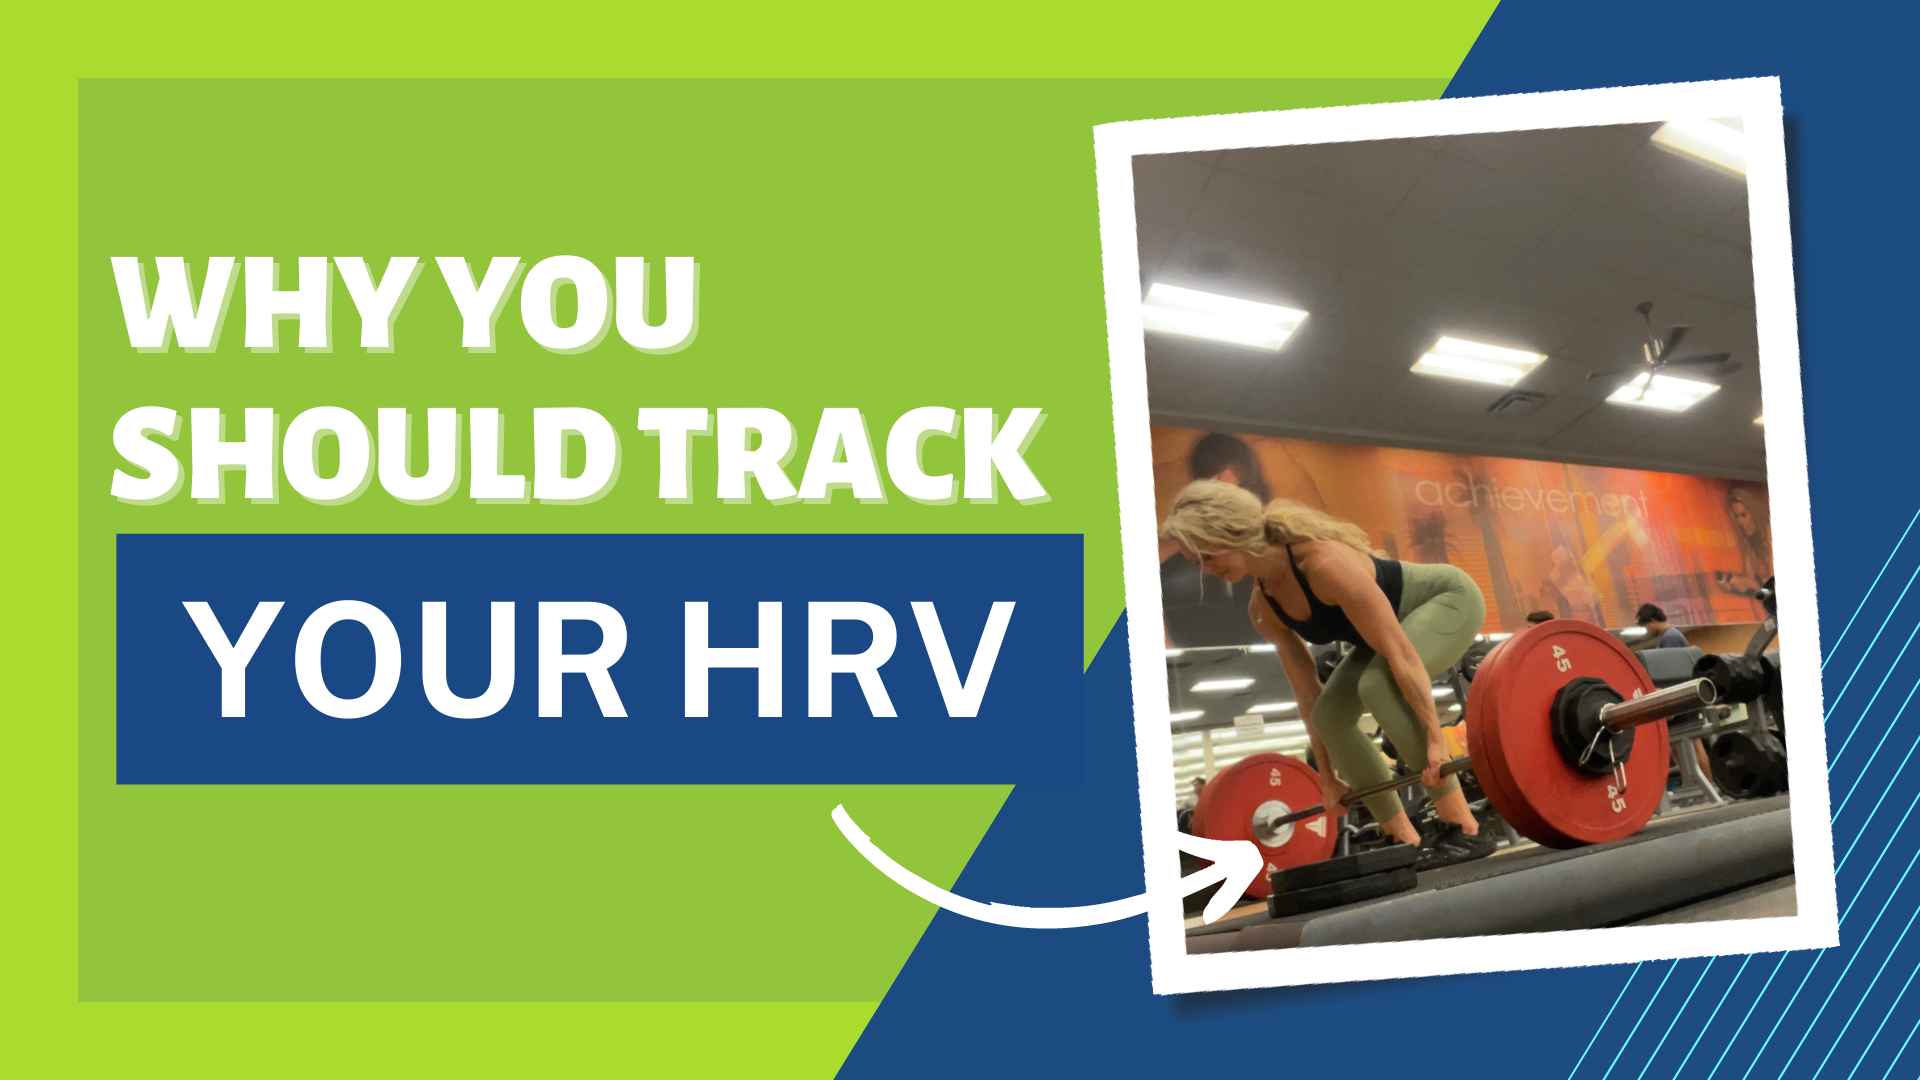 Why you should track your HRV